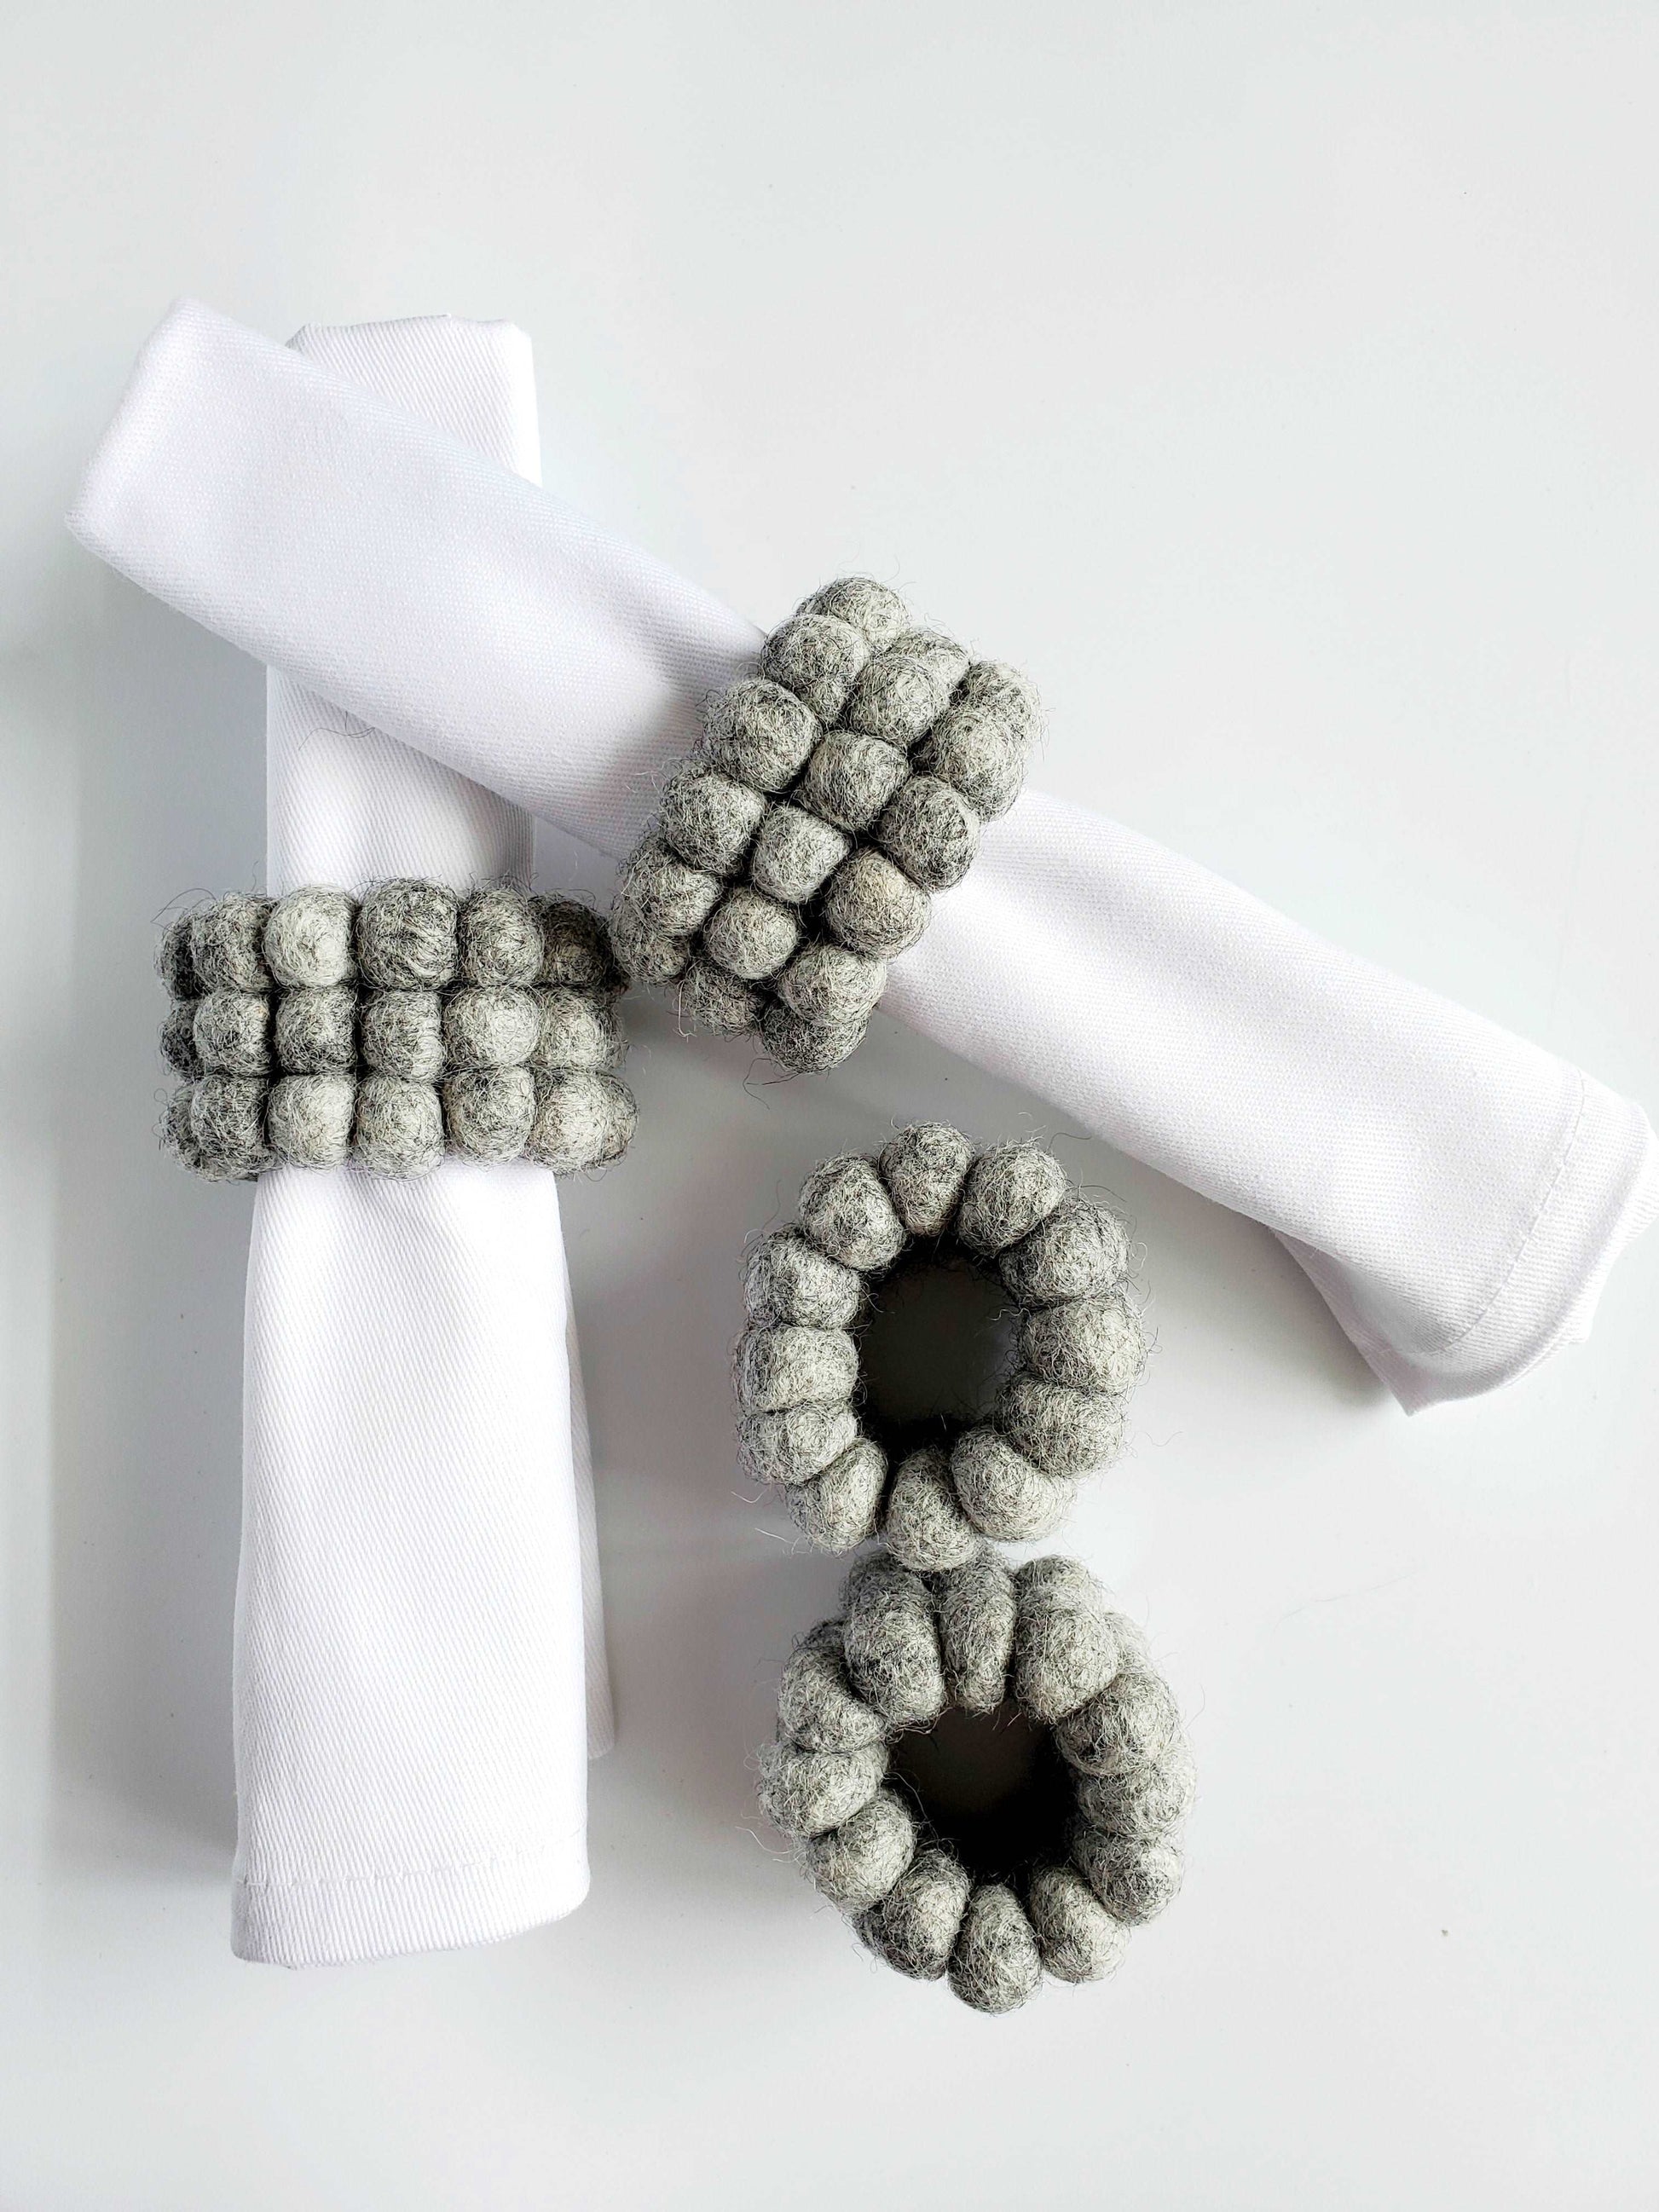 This Global Groove Life, handmade, ethical, fair trade, eco-friendly, sustainable, felt Heather Grey Napkin Ring set was created by artisans in Kathmandu Nepal and will bring colorful warmth and functionality to your table top.